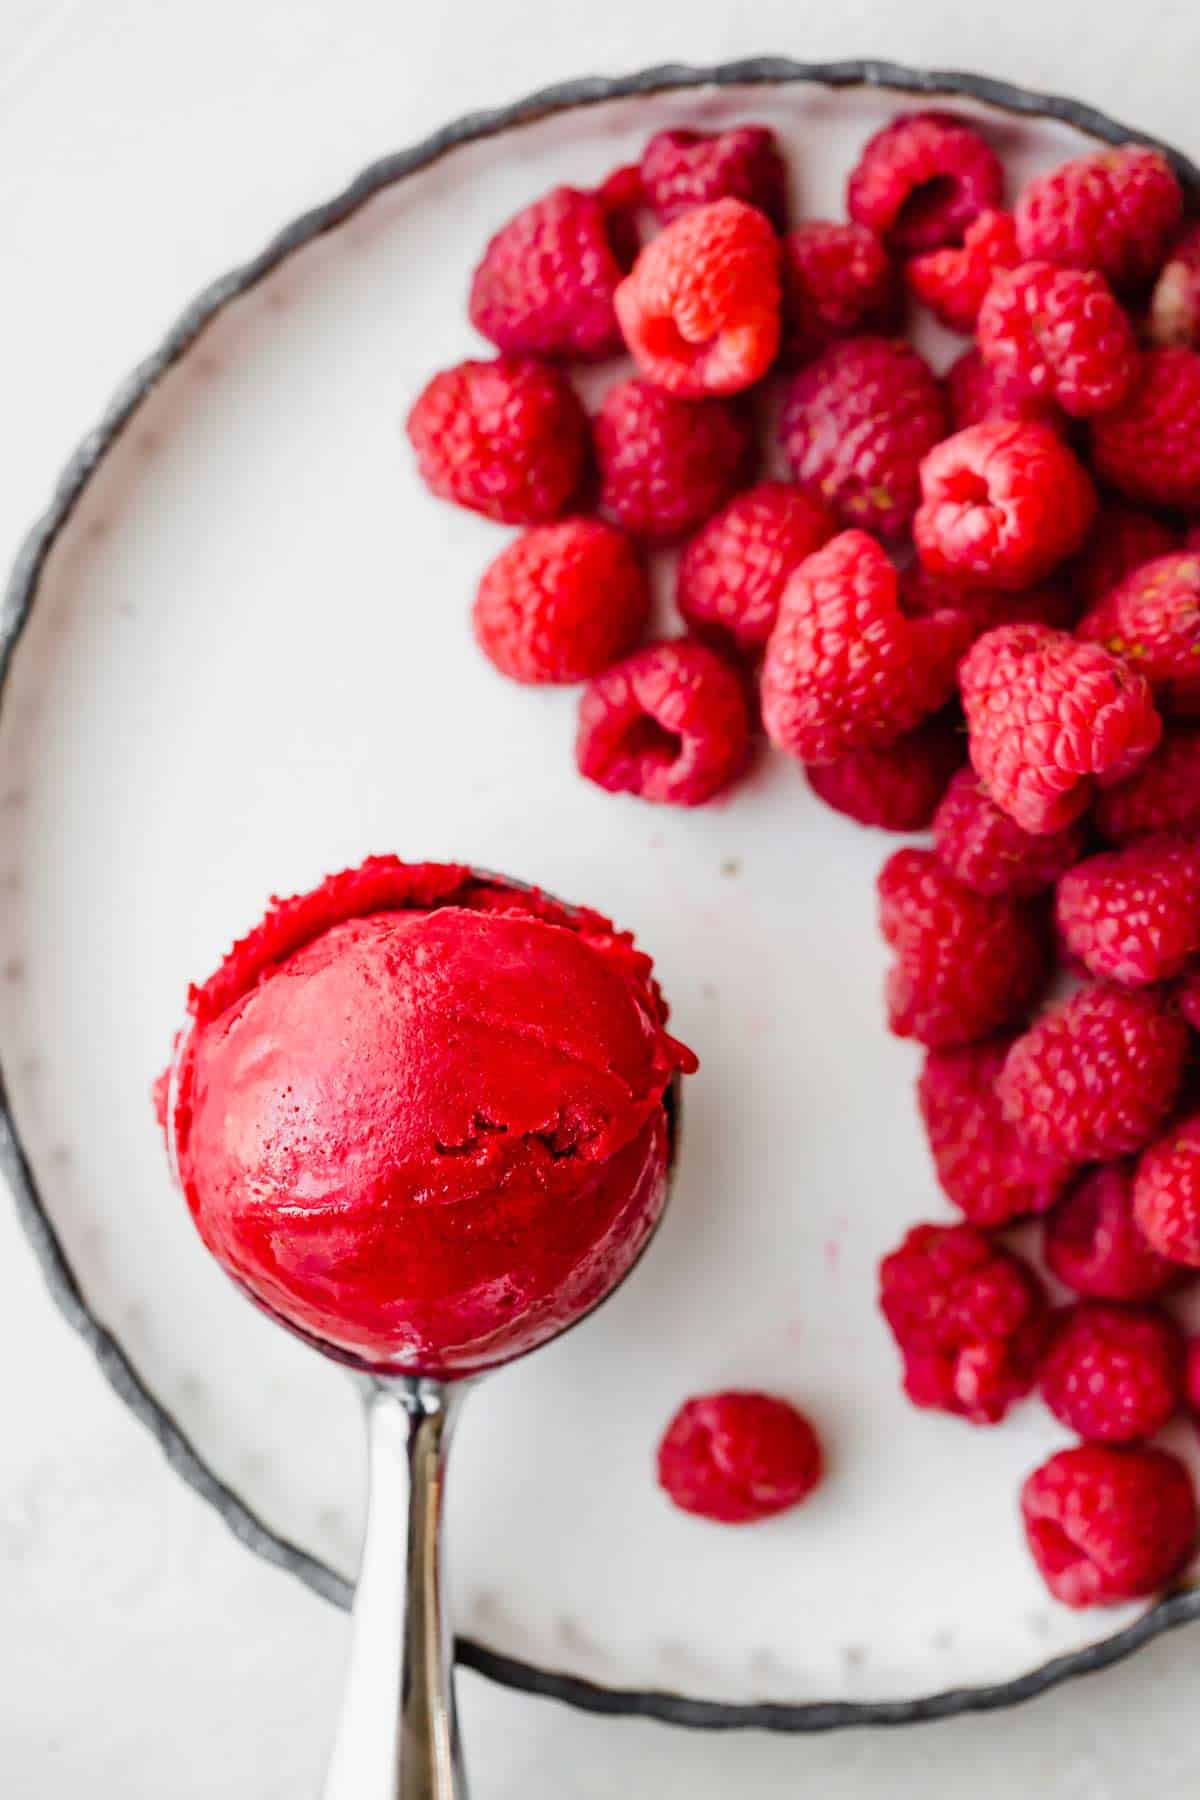 Raspberry Sorbet in an ice cream scoop with fresh raspberries to the right of the scooper.